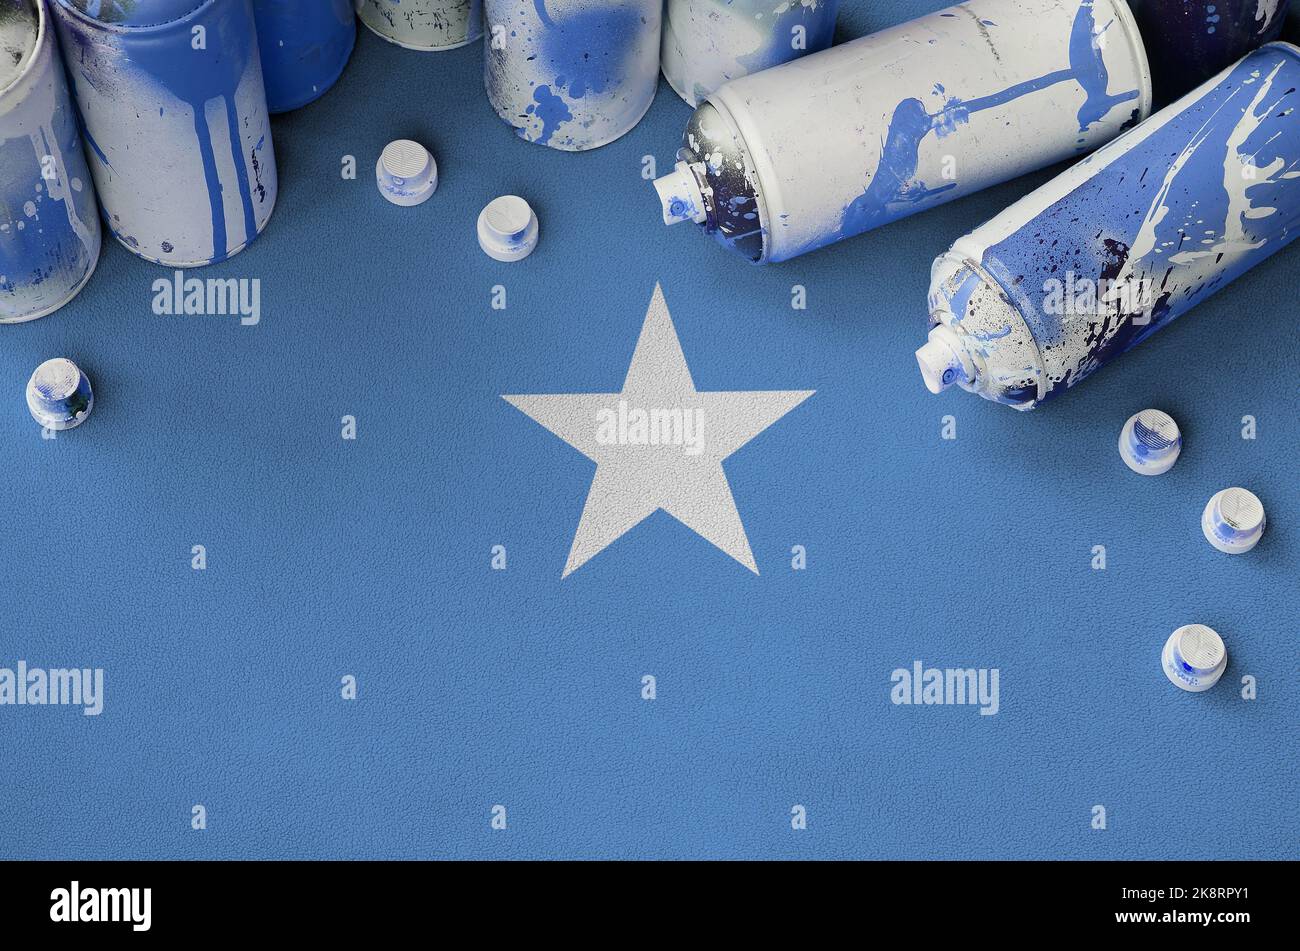 Somalia flag and few used aerosol spray cans for graffiti painting. Street art culture concept, vandalism problems Stock Photo